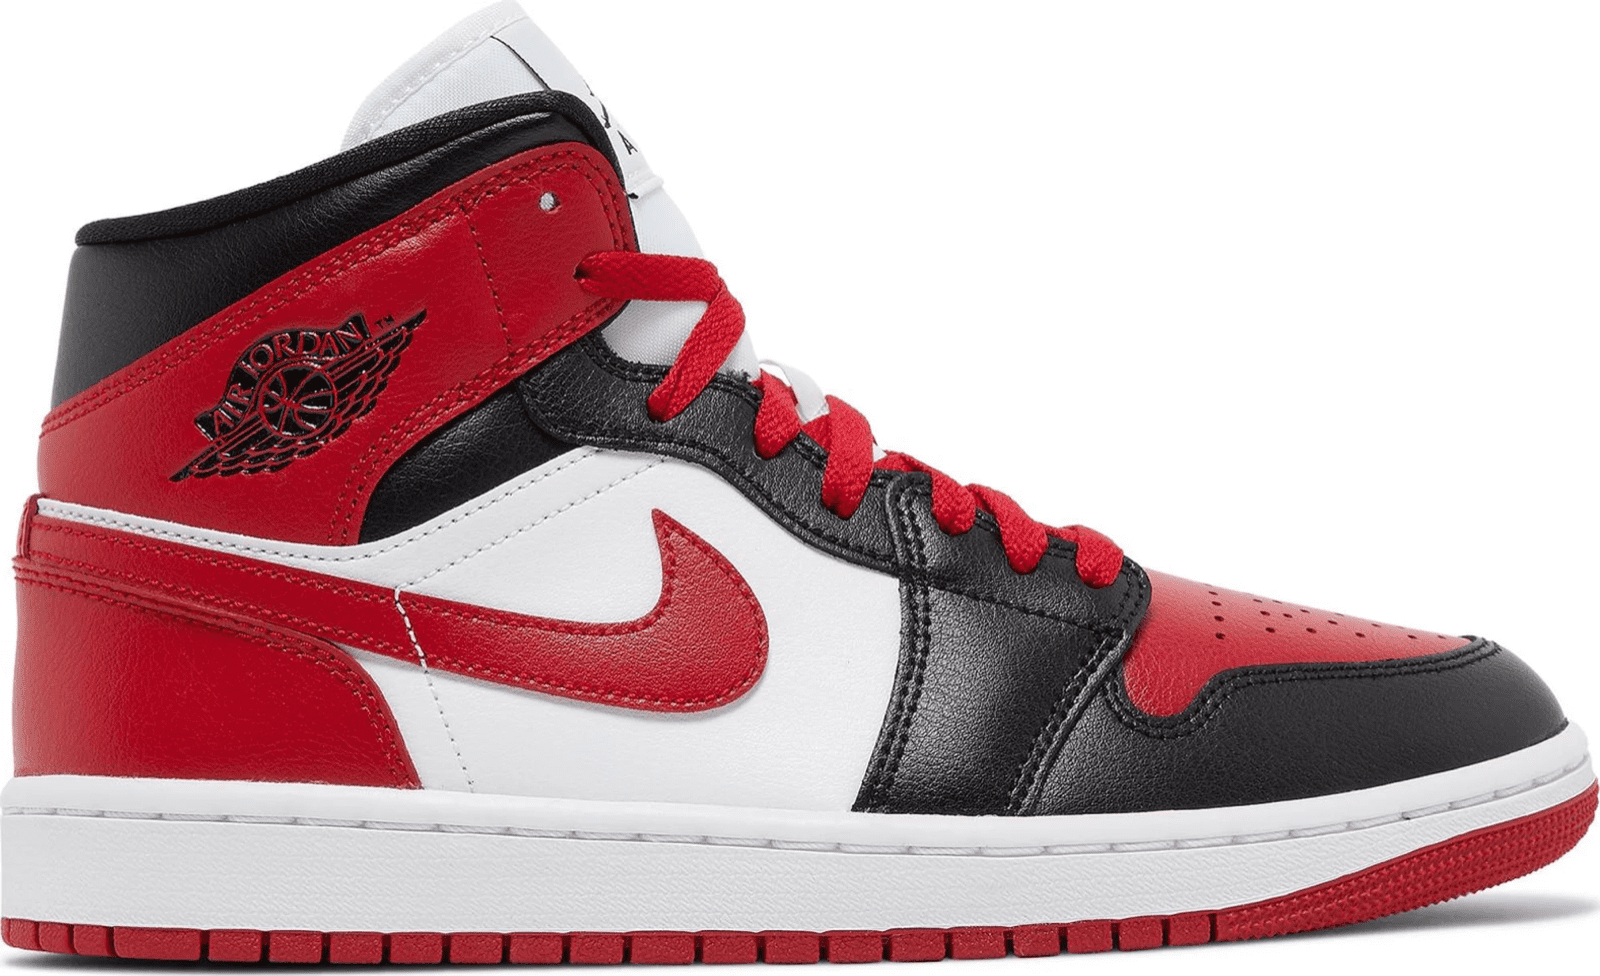 jordan 1s red and black and white